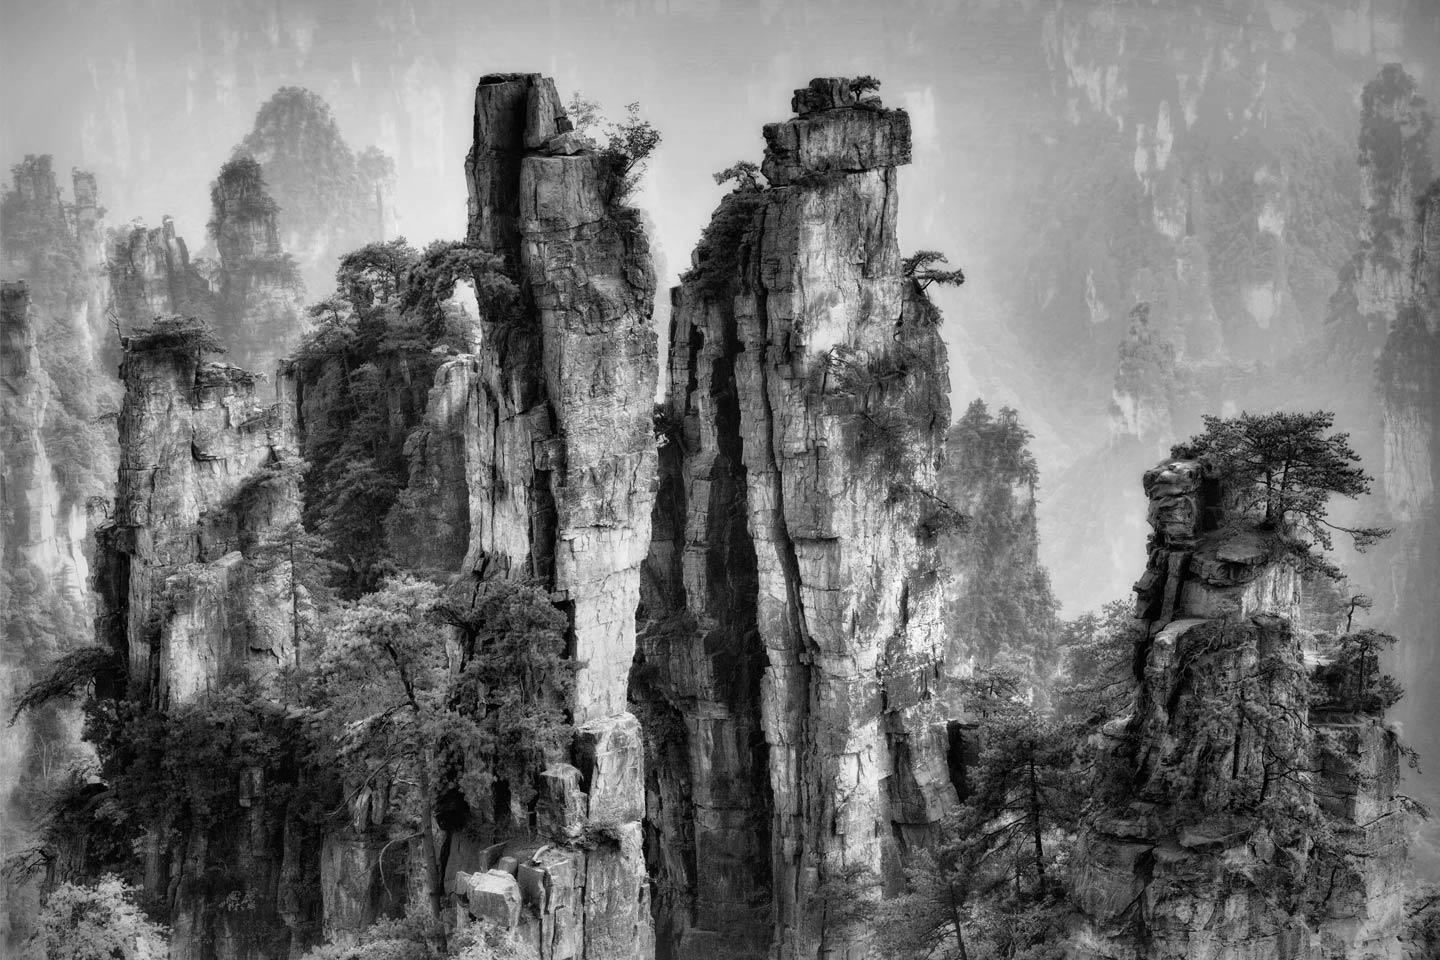 Karst Formations, Hunan, China, by Louis Montrose

3rd place in the Landscape/Seascape/Nature category